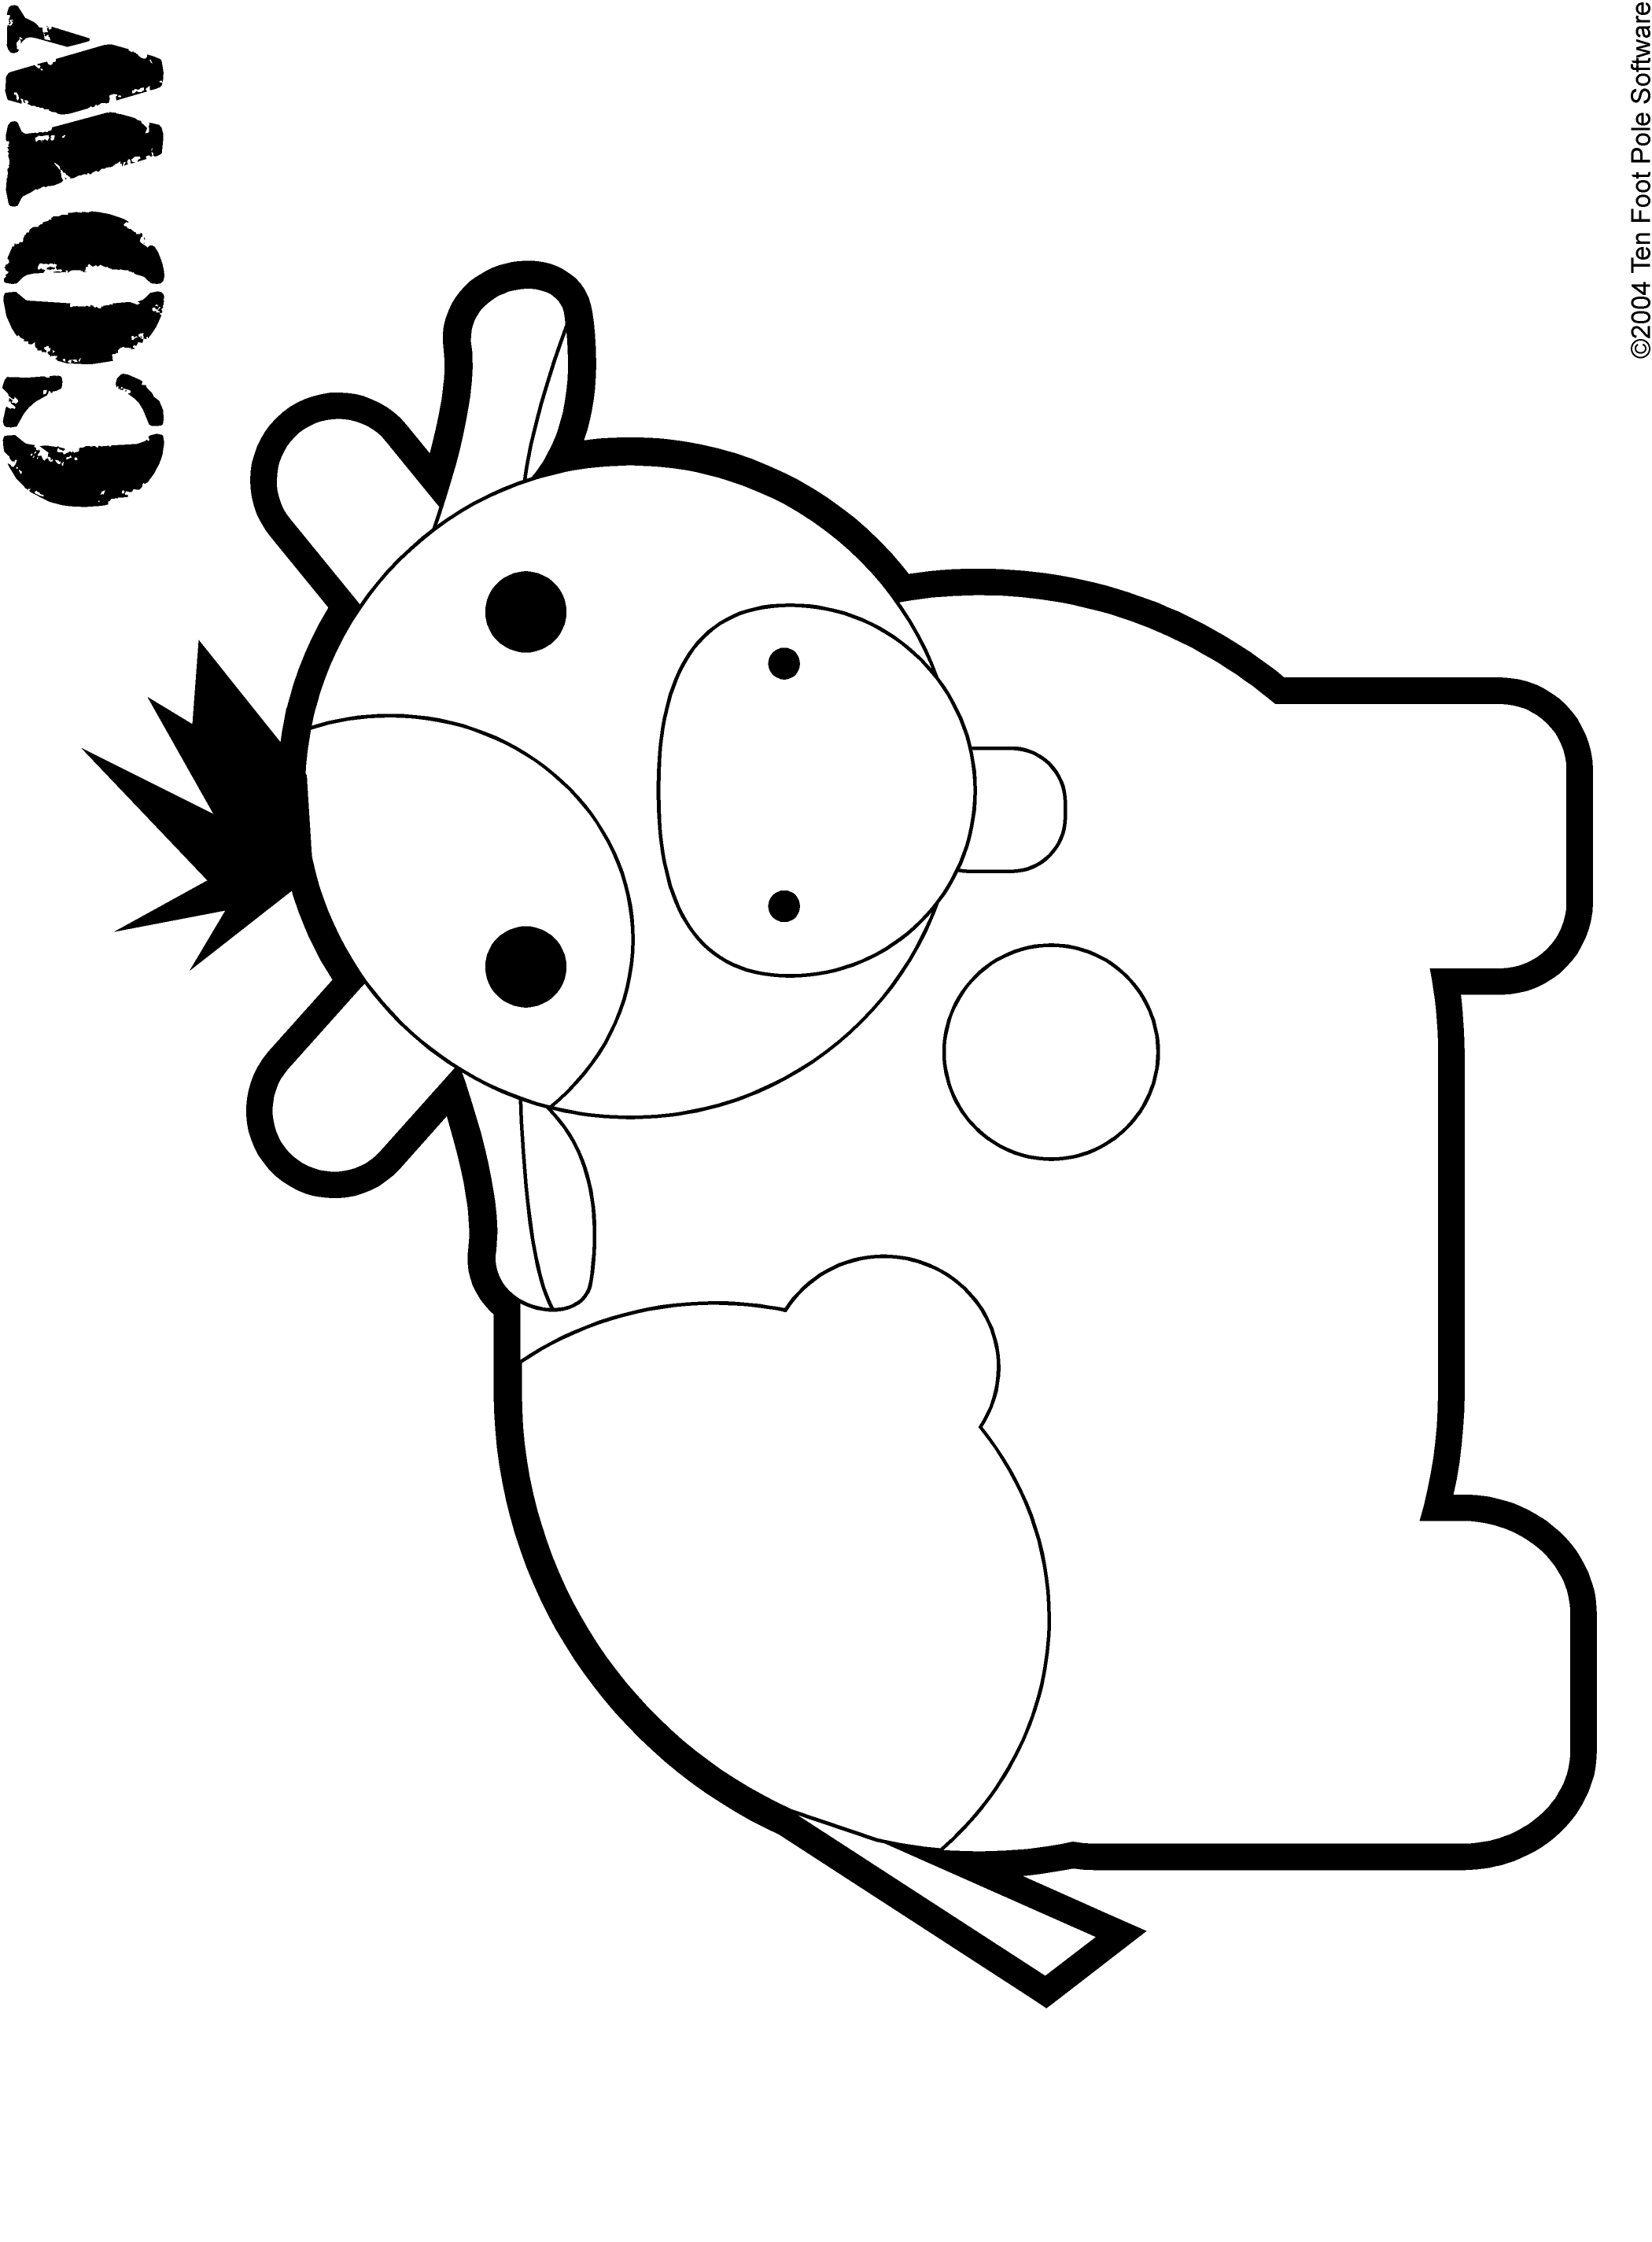 kindergarten-coloring-pages-free-download-on-clipartmag